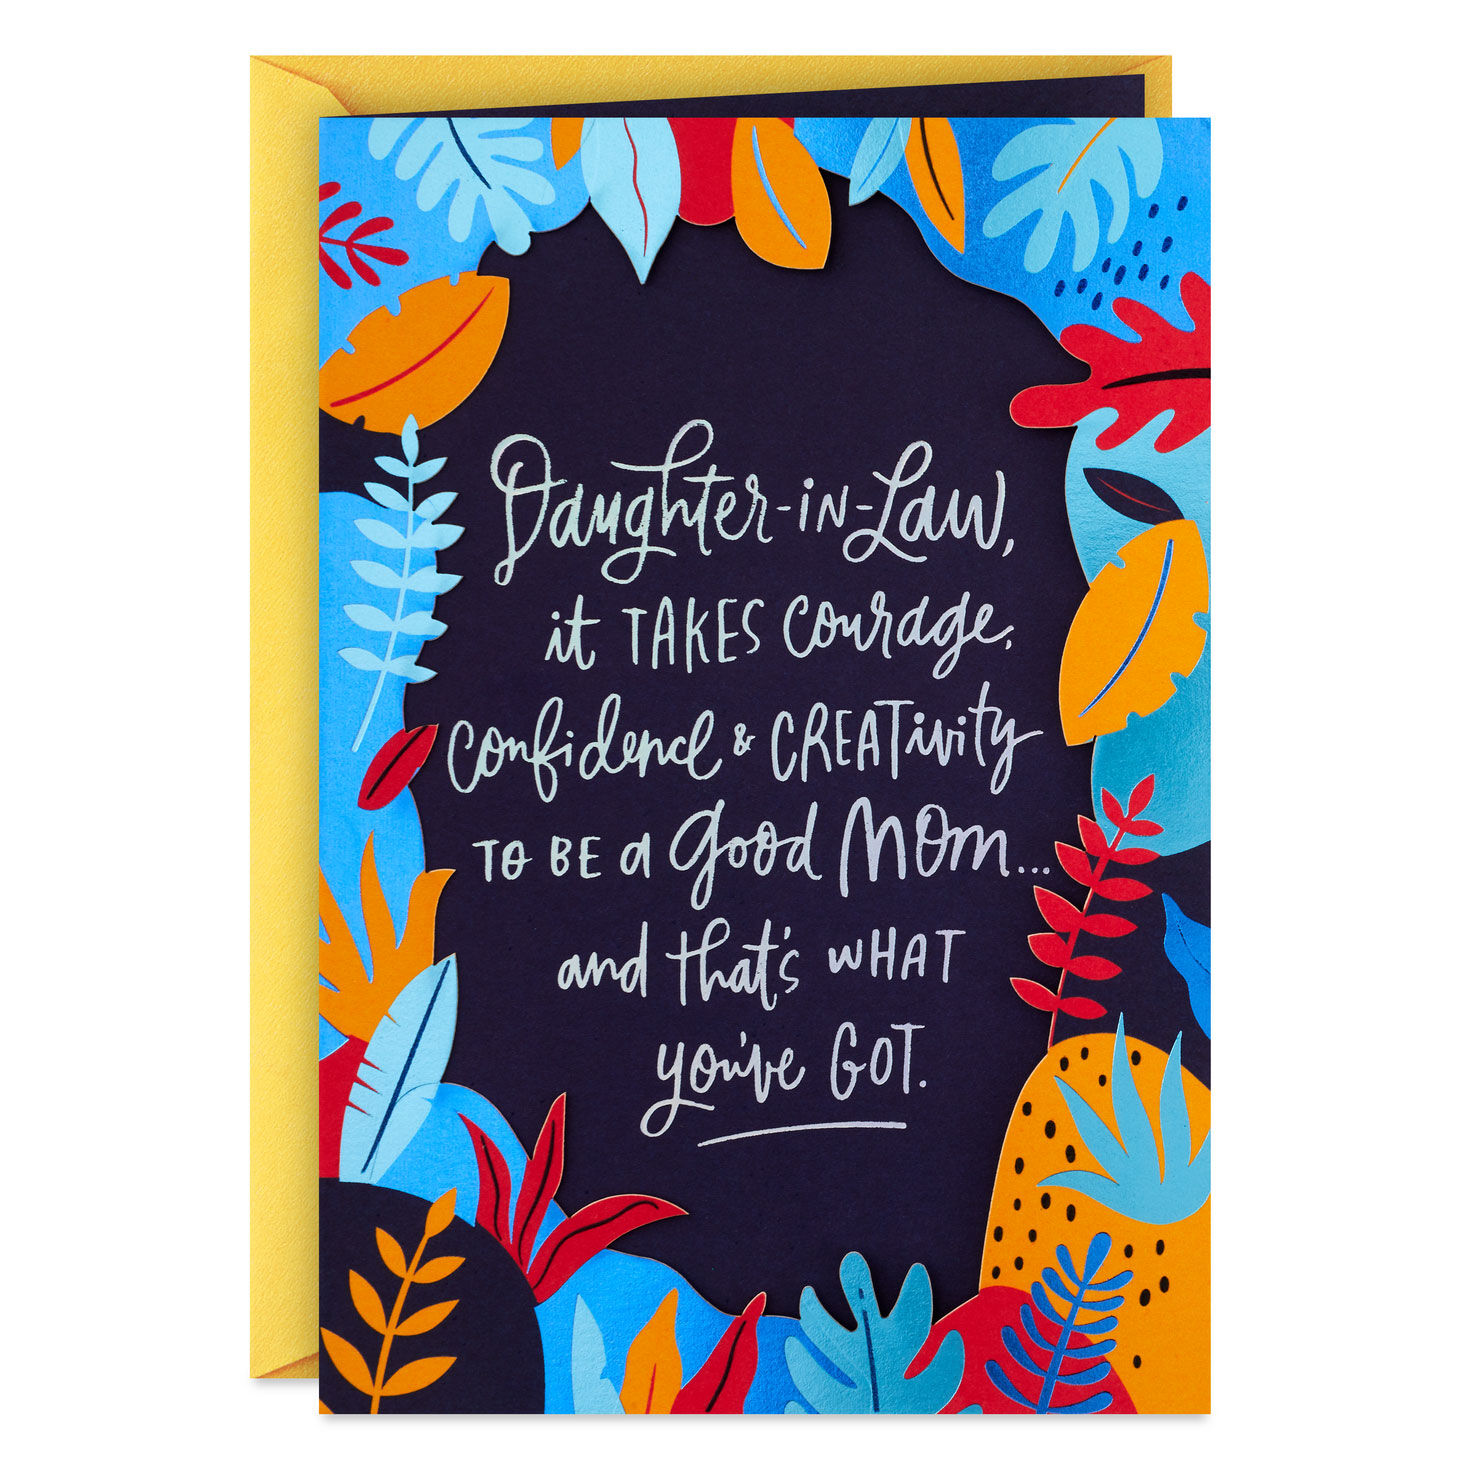 Courage and Creativity Mother's Day Card for Daughter-in-Law for only USD 5.59 | Hallmark